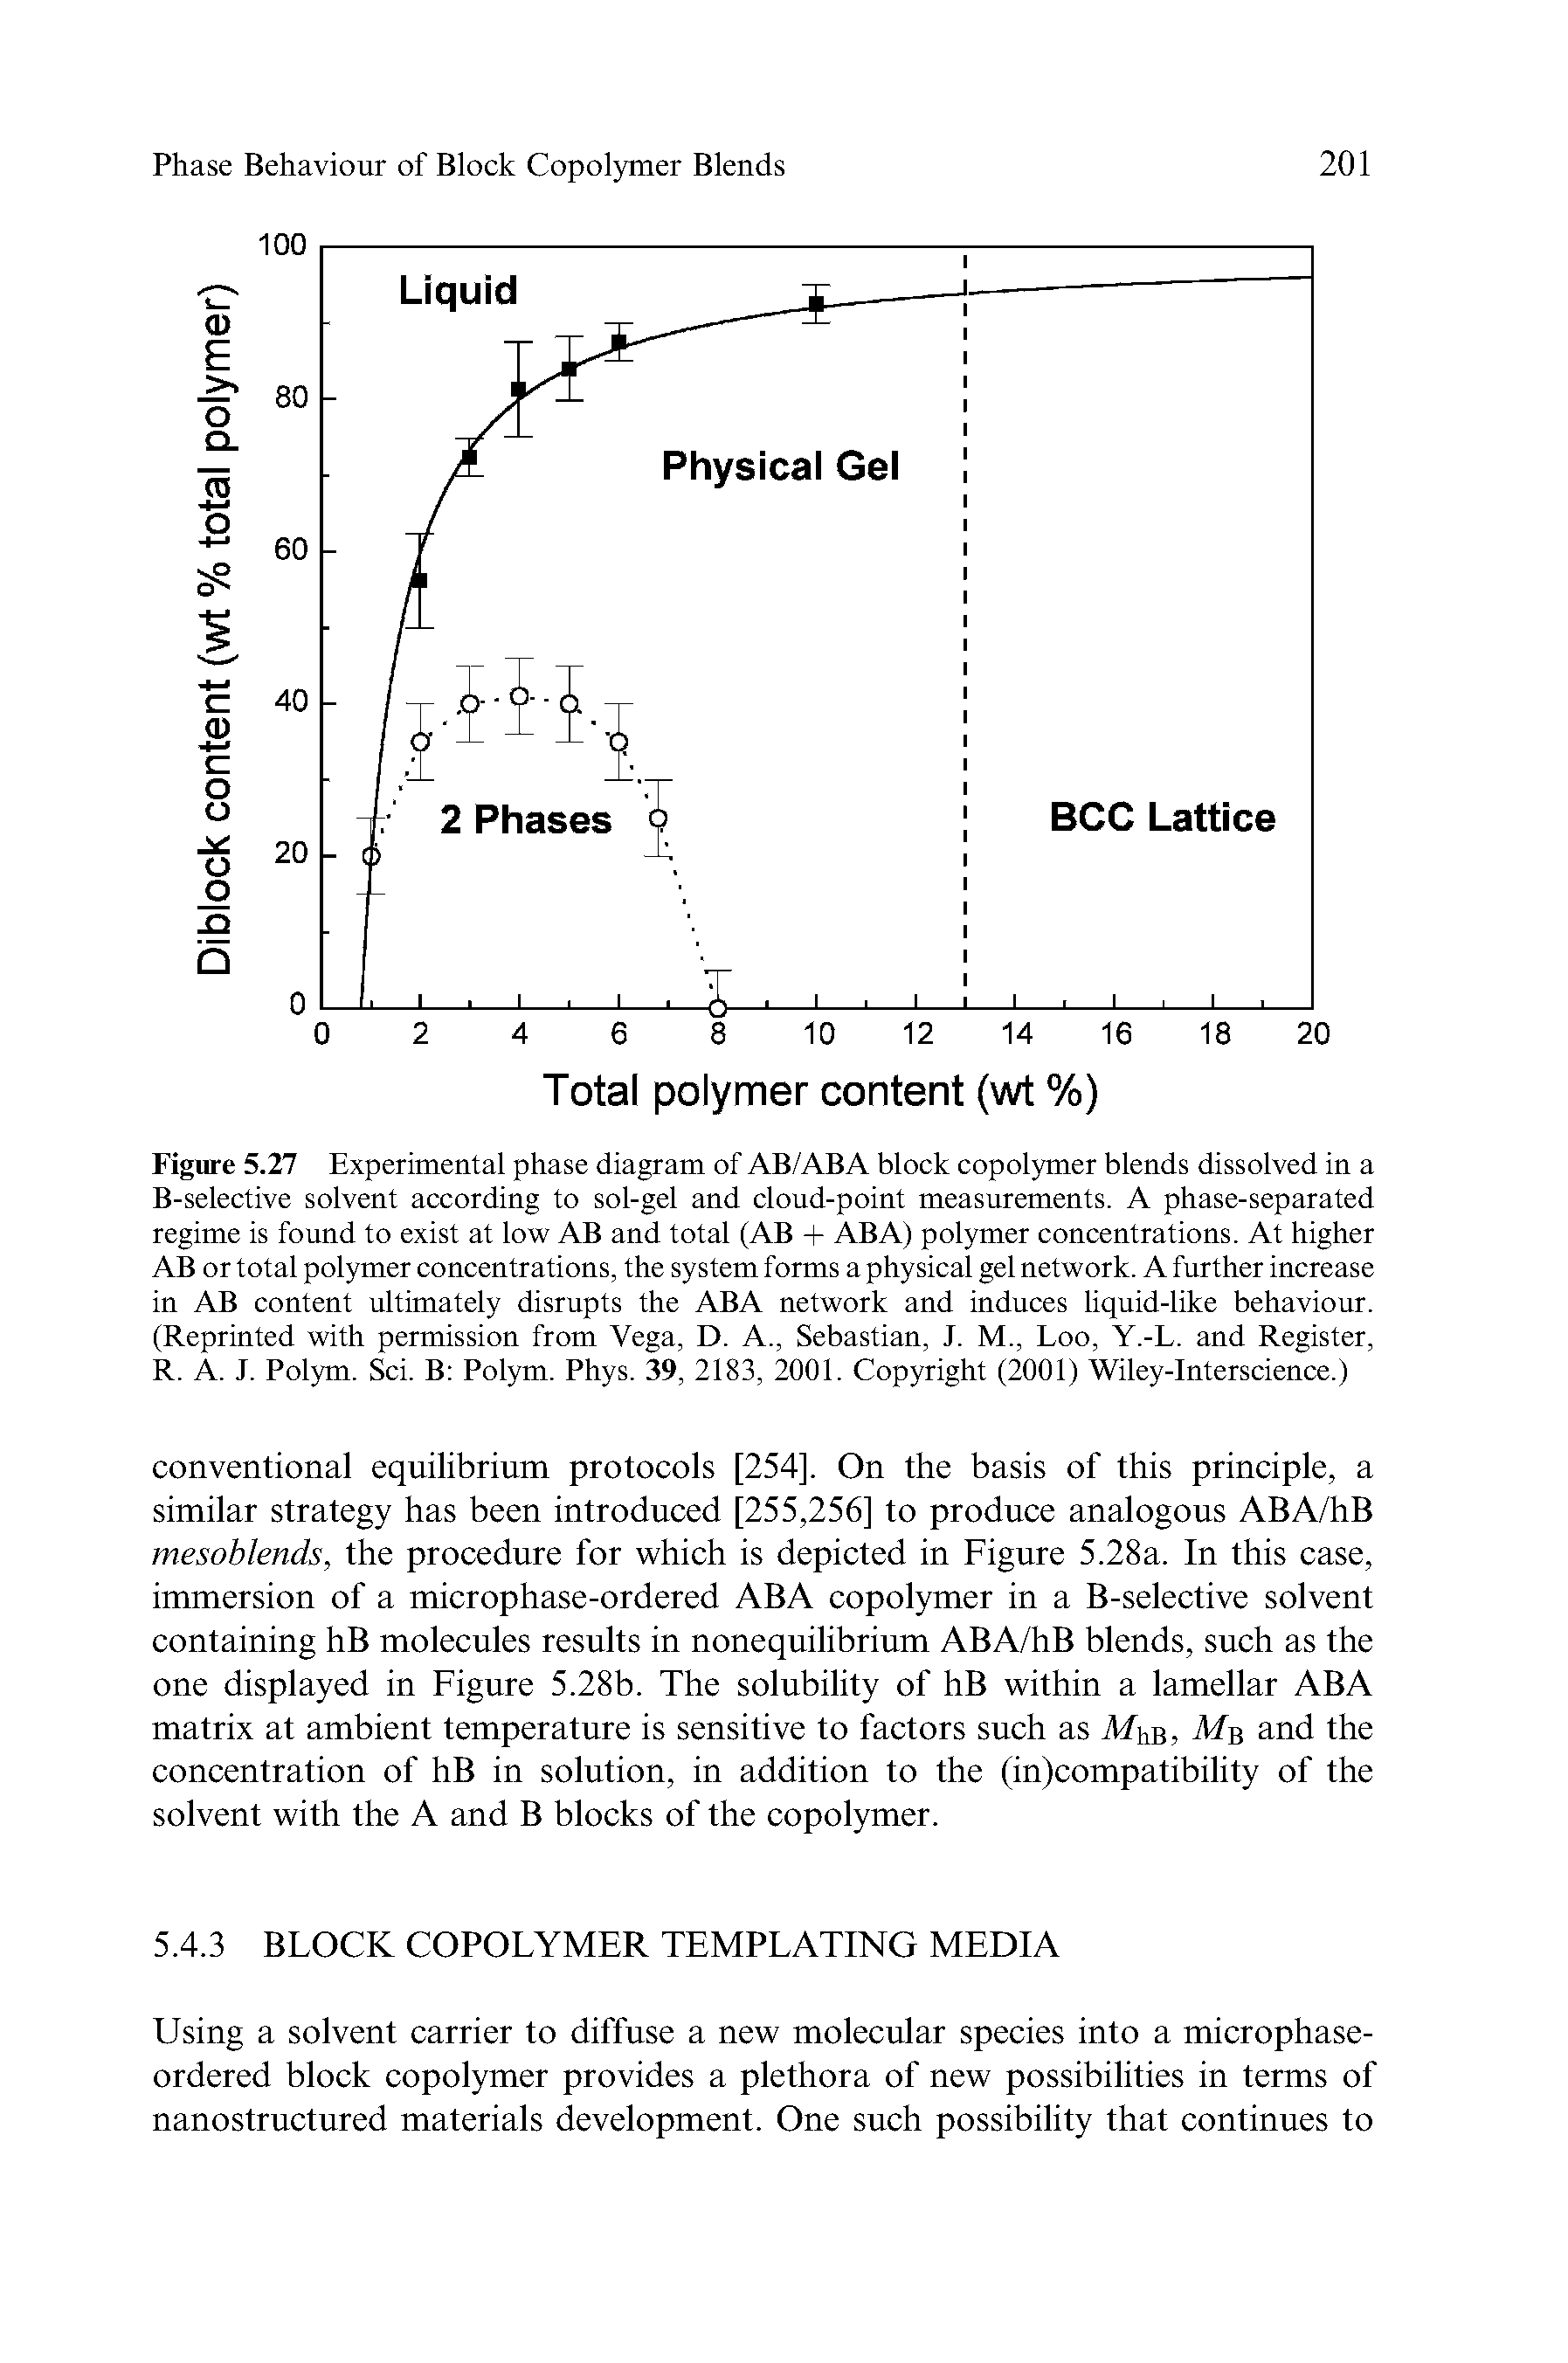 Figure 5.27 Experimental phase diagram of AB/ABA block copolymer blends dissolved in a B-selective solvent according to sol-gel and cloud-point measurements. A phase-separated regime is found to exist at low AB and total (AB + ABA) polymer concentrations. At higher AB or total polymer concentrations, the system forms a physical gel network. A further increase in AB content ultimately disrupts the ABA network and induces liquid-like behaviour. (Reprinted with permission from Vega, D. A., Sebastian, J. M., Loo, Y.-L. and Register, R. A. J. Polym. Sci. B Polym. Phys. 39, 2183, 2001. Copyright (2001) Wiley-Interscience.)...